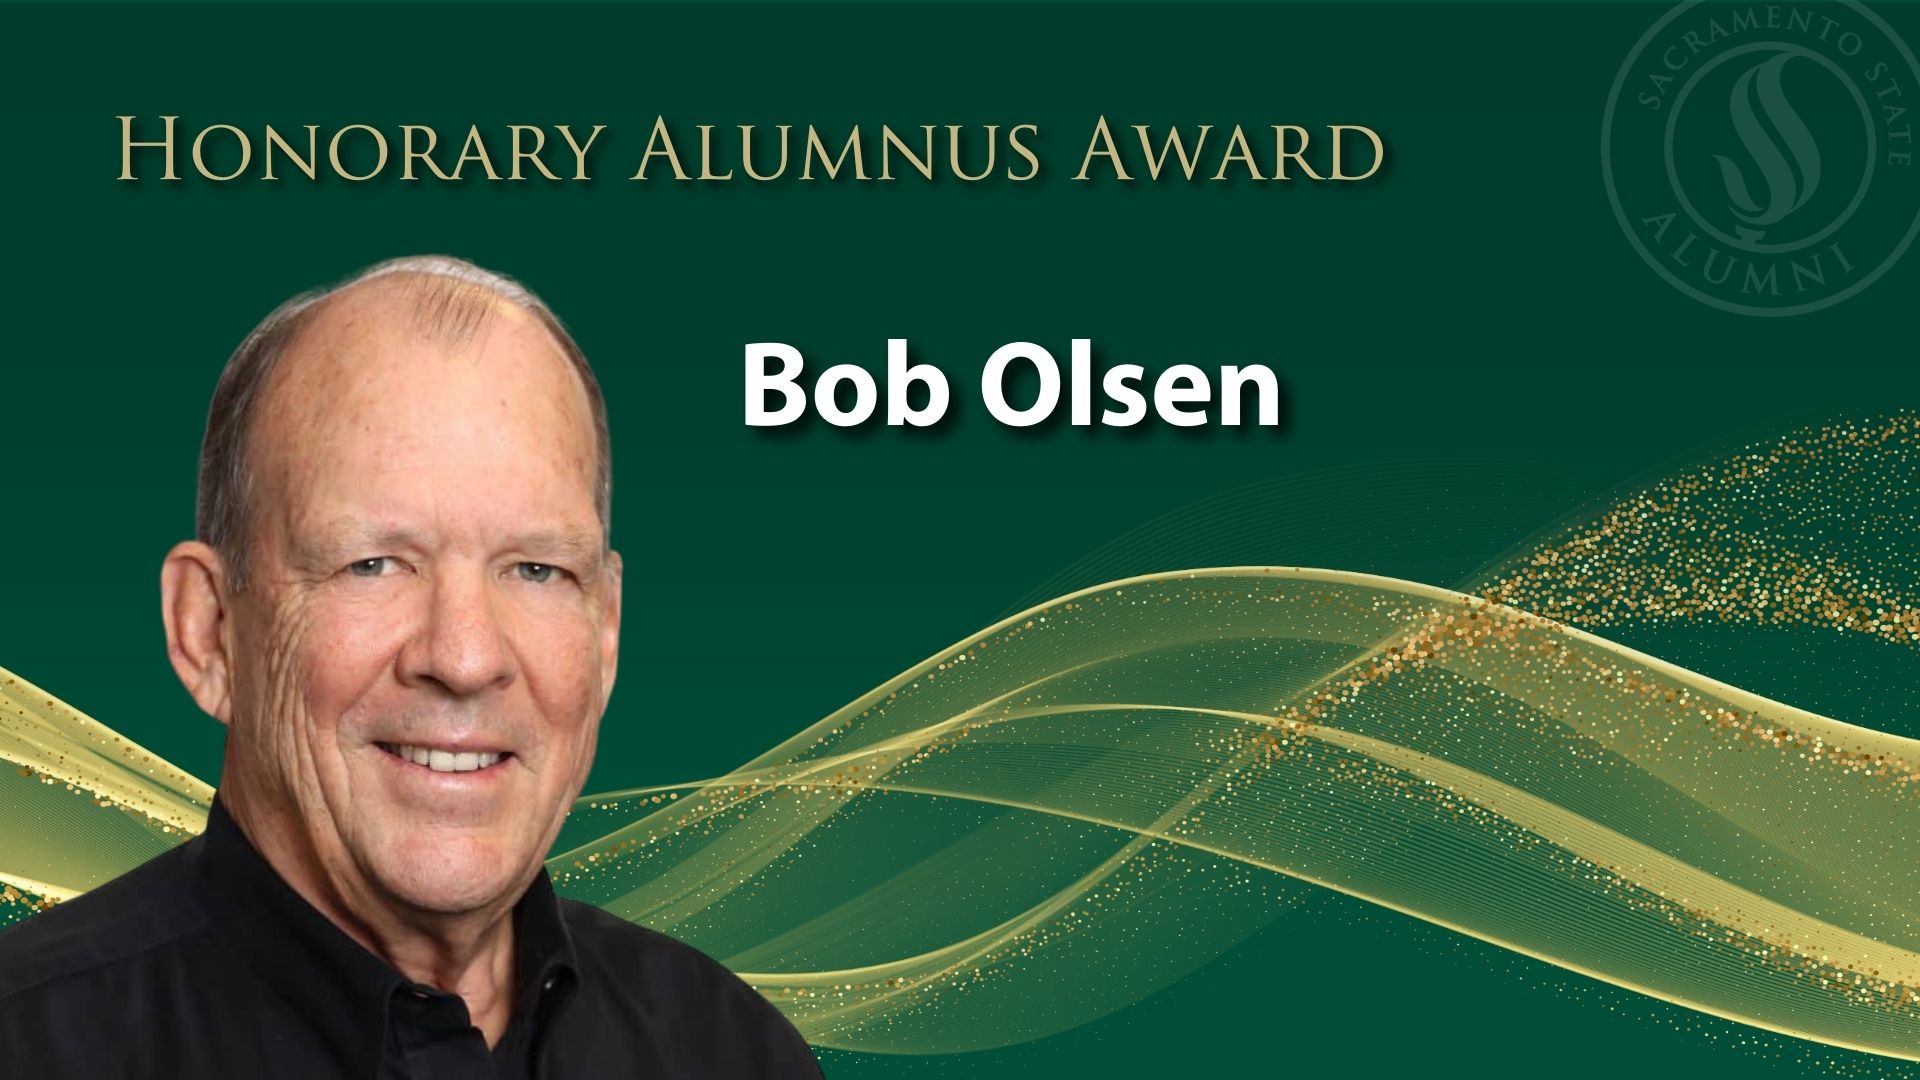 Bob Olsen, who helped make Sac State’s Construction Management program successful, named Honorary Alumnus